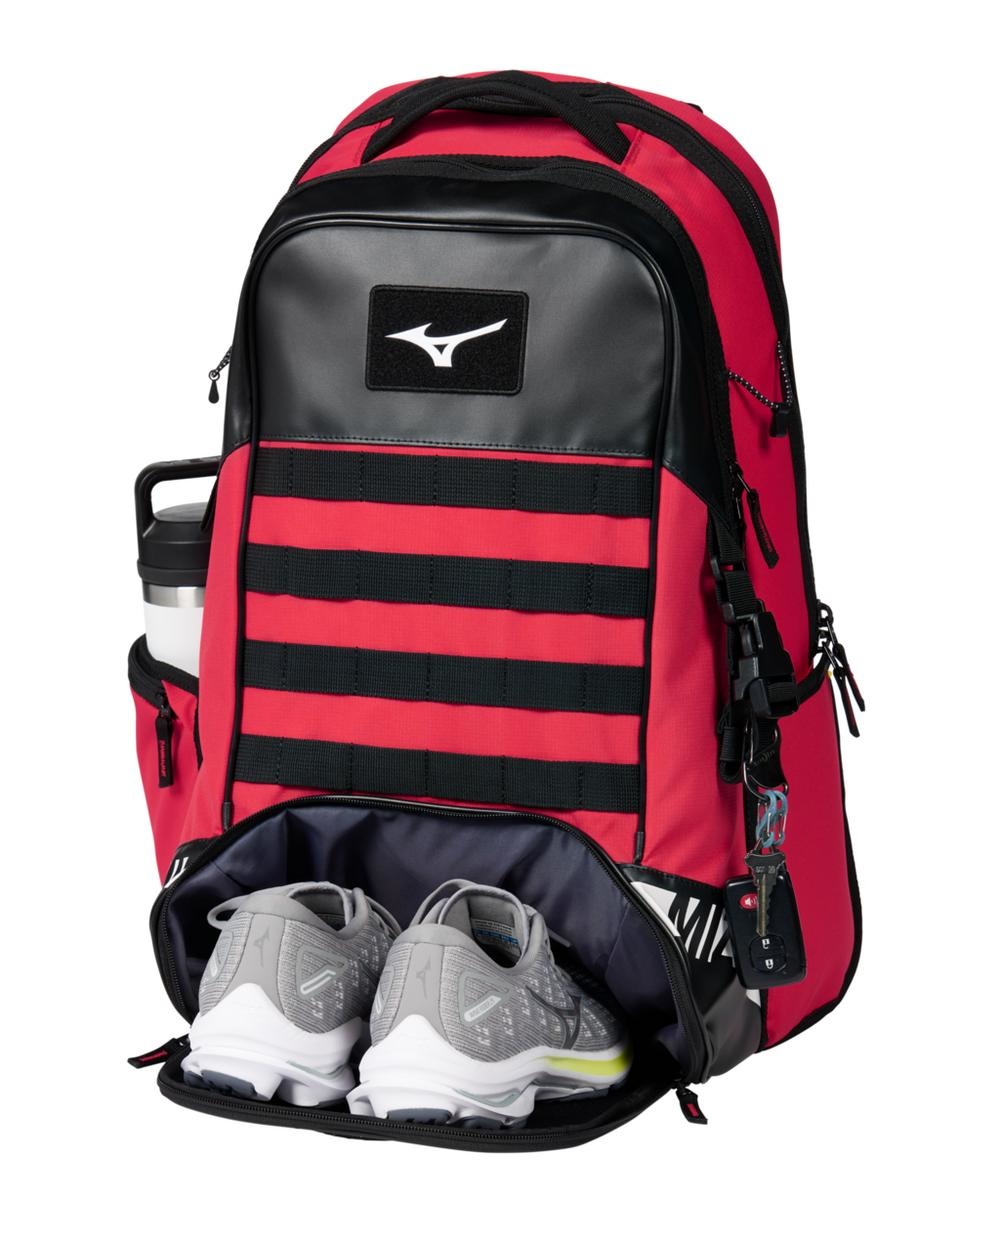 Used BoomBah CATCHERS BAG/BACKPACK Baseball and Softball Equipment Bags  Baseball and Softball Equipment Bags